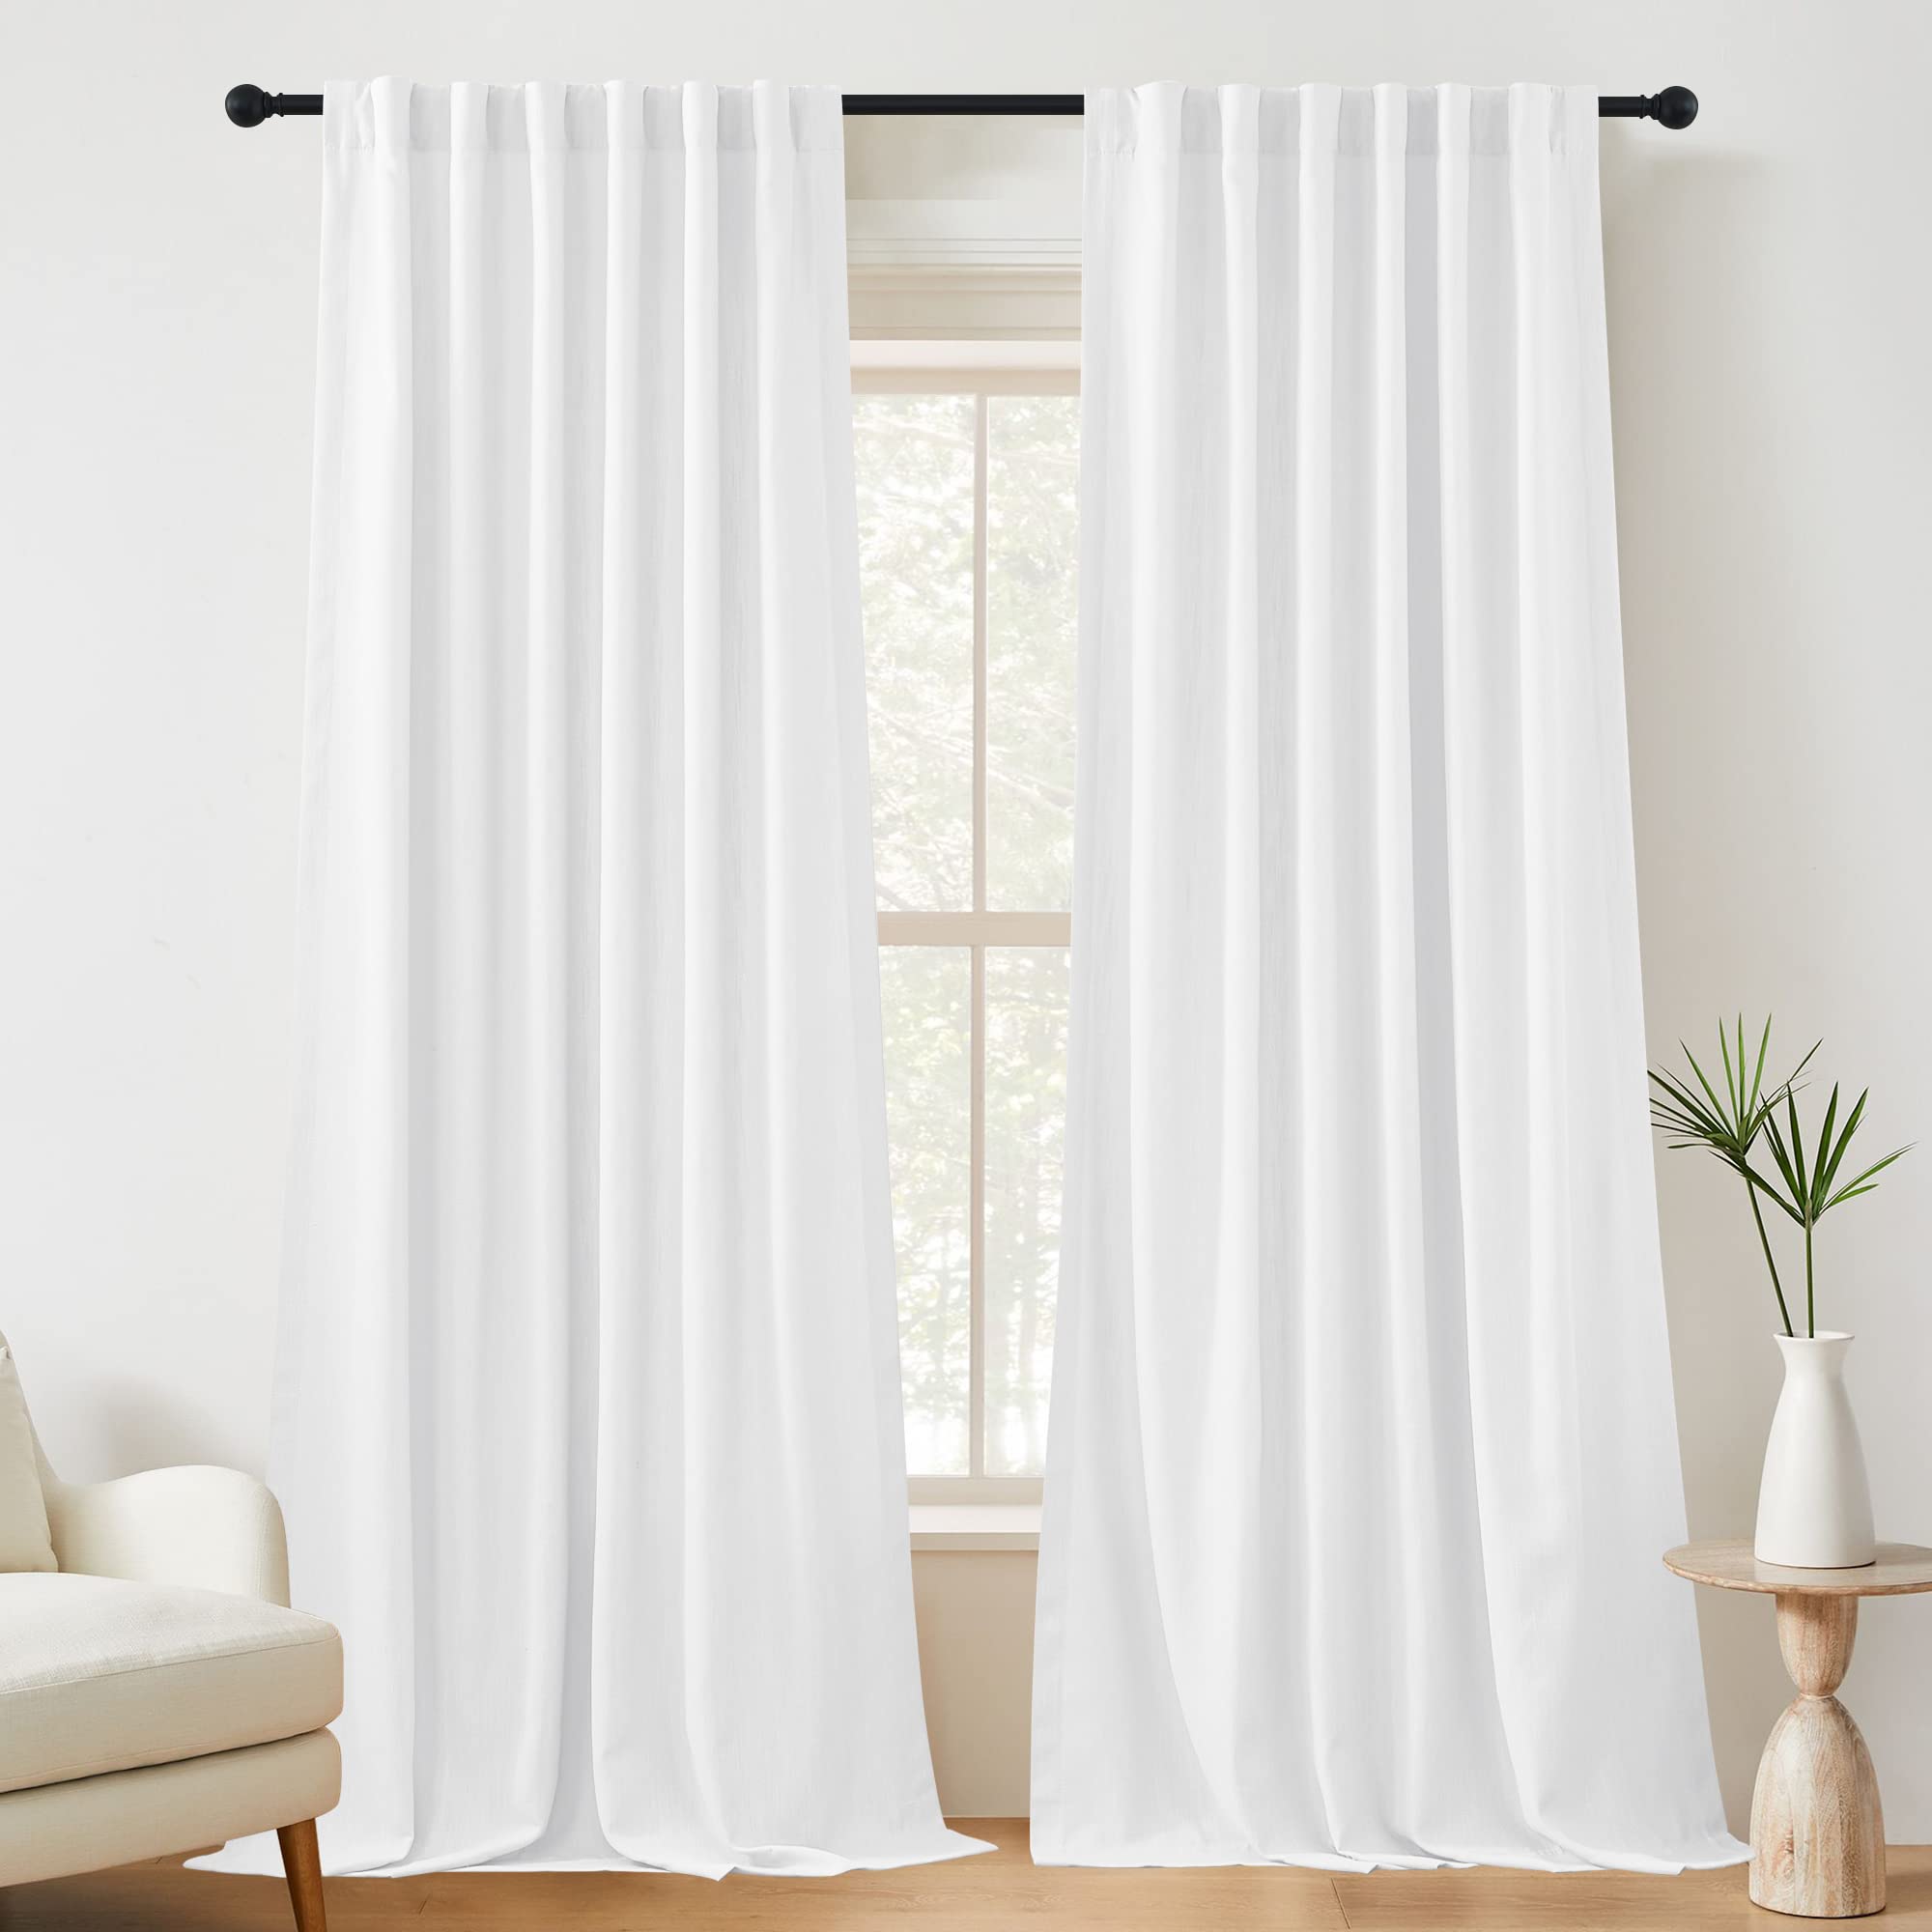 Blackout Curtains Room Darkening Window Curtains with Heavy Faux Linen 2 Panels